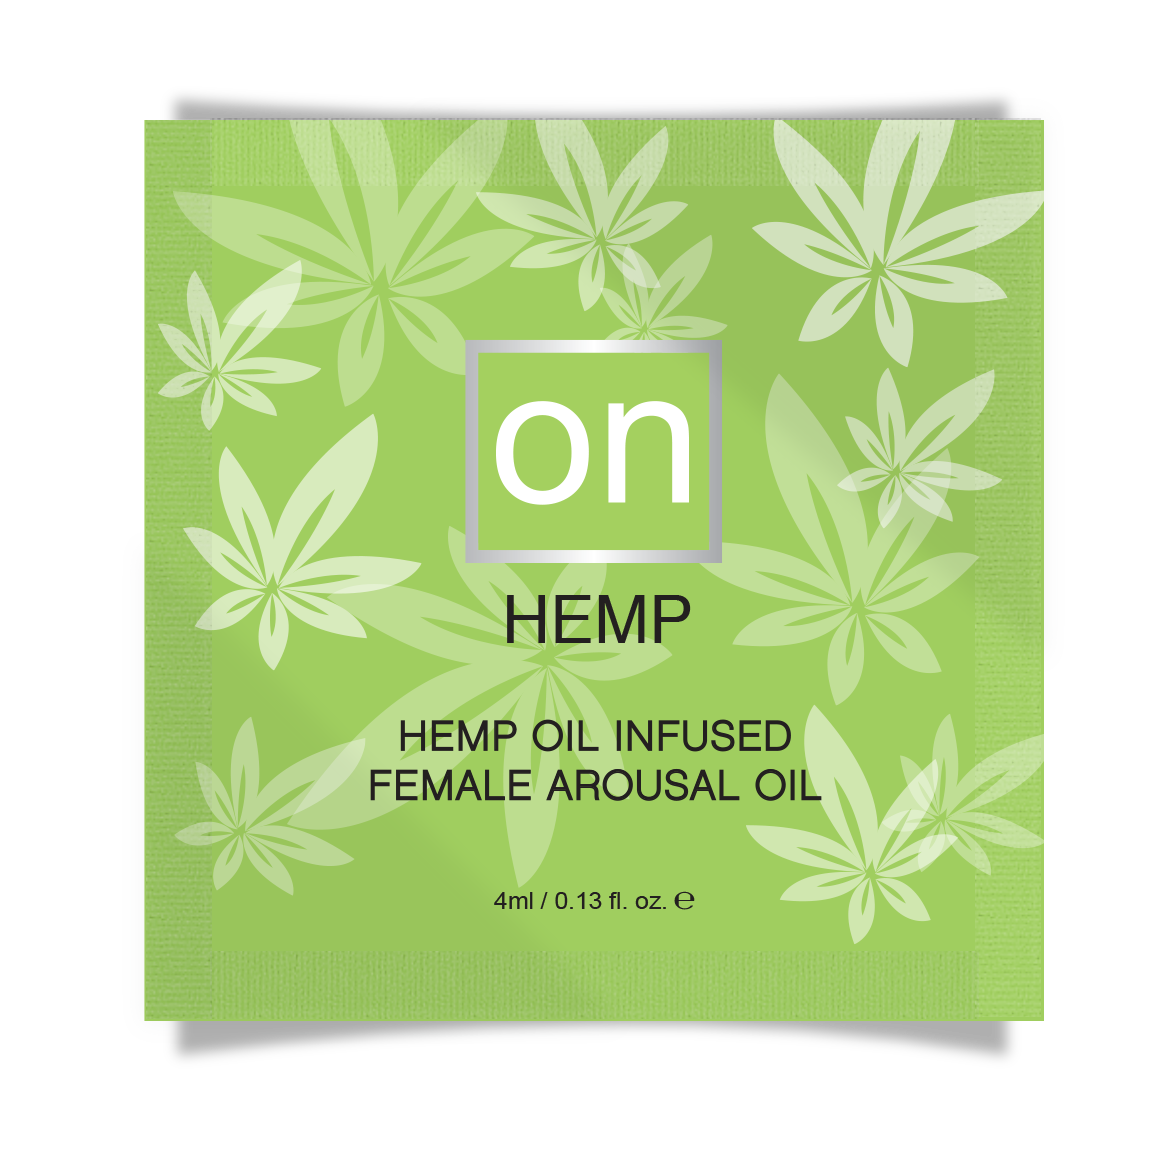 On for Her Arousal Oil HEMP Single Use Ampoule